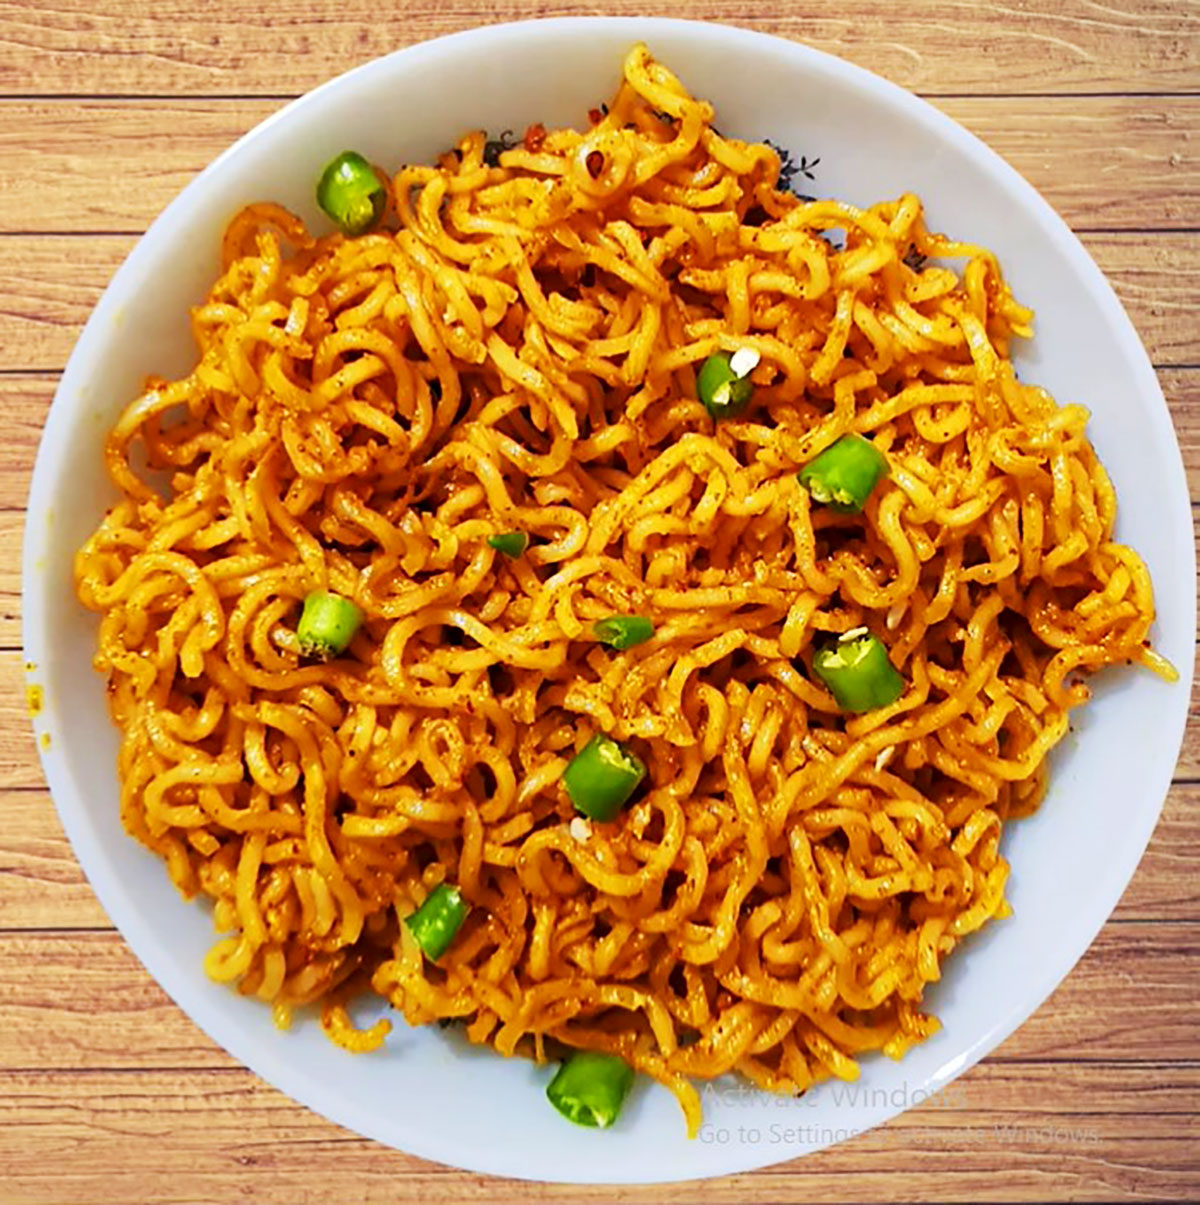 Maggi: History of 2 minutes noodles and its future.